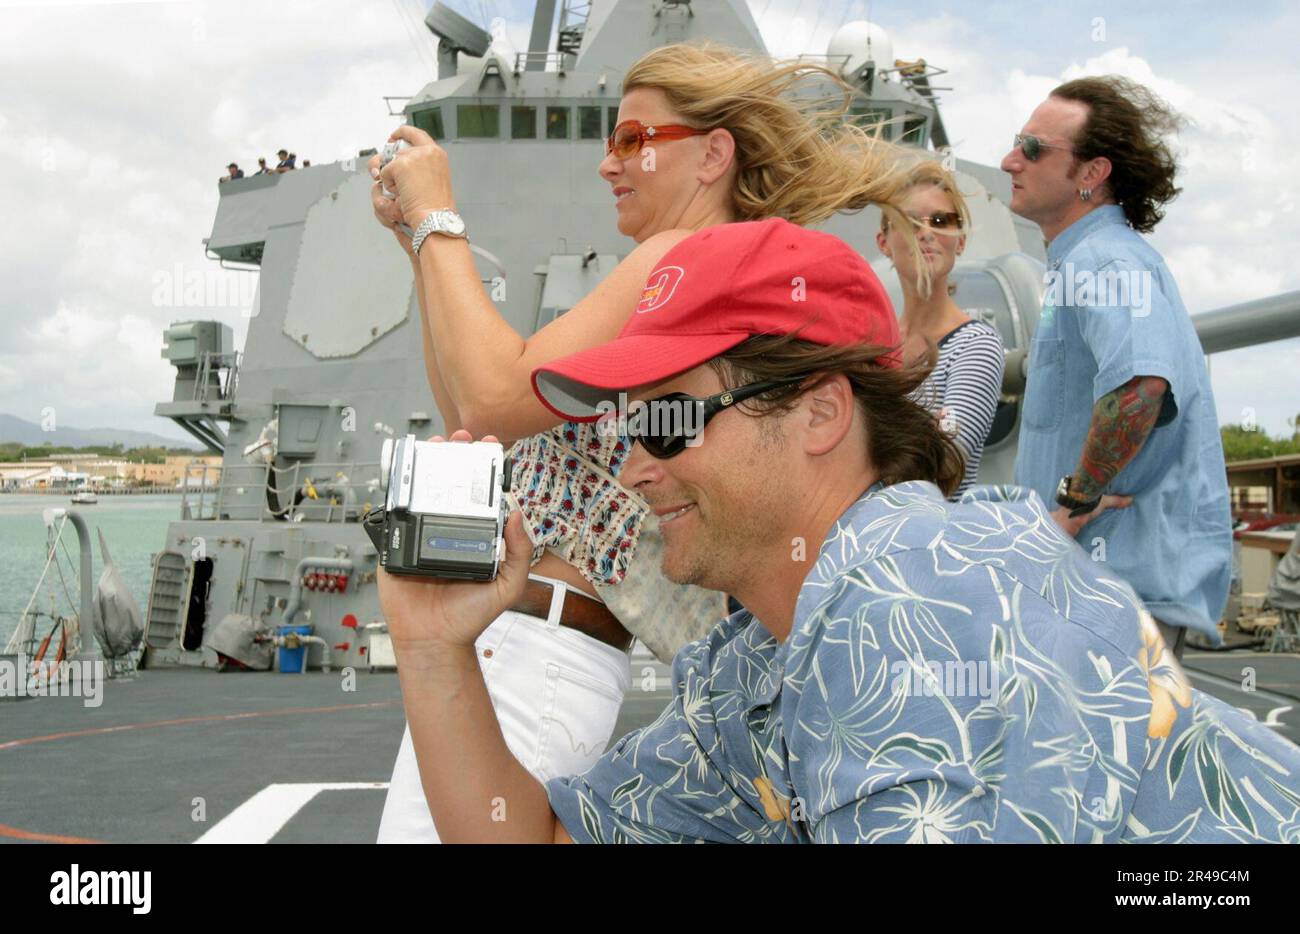 US Navy Actor Rob Lowe, and wife Sheryl Berkoff take photos during a tour of the guided missile destroyer USS Russell (DDG 59) Stock Photo